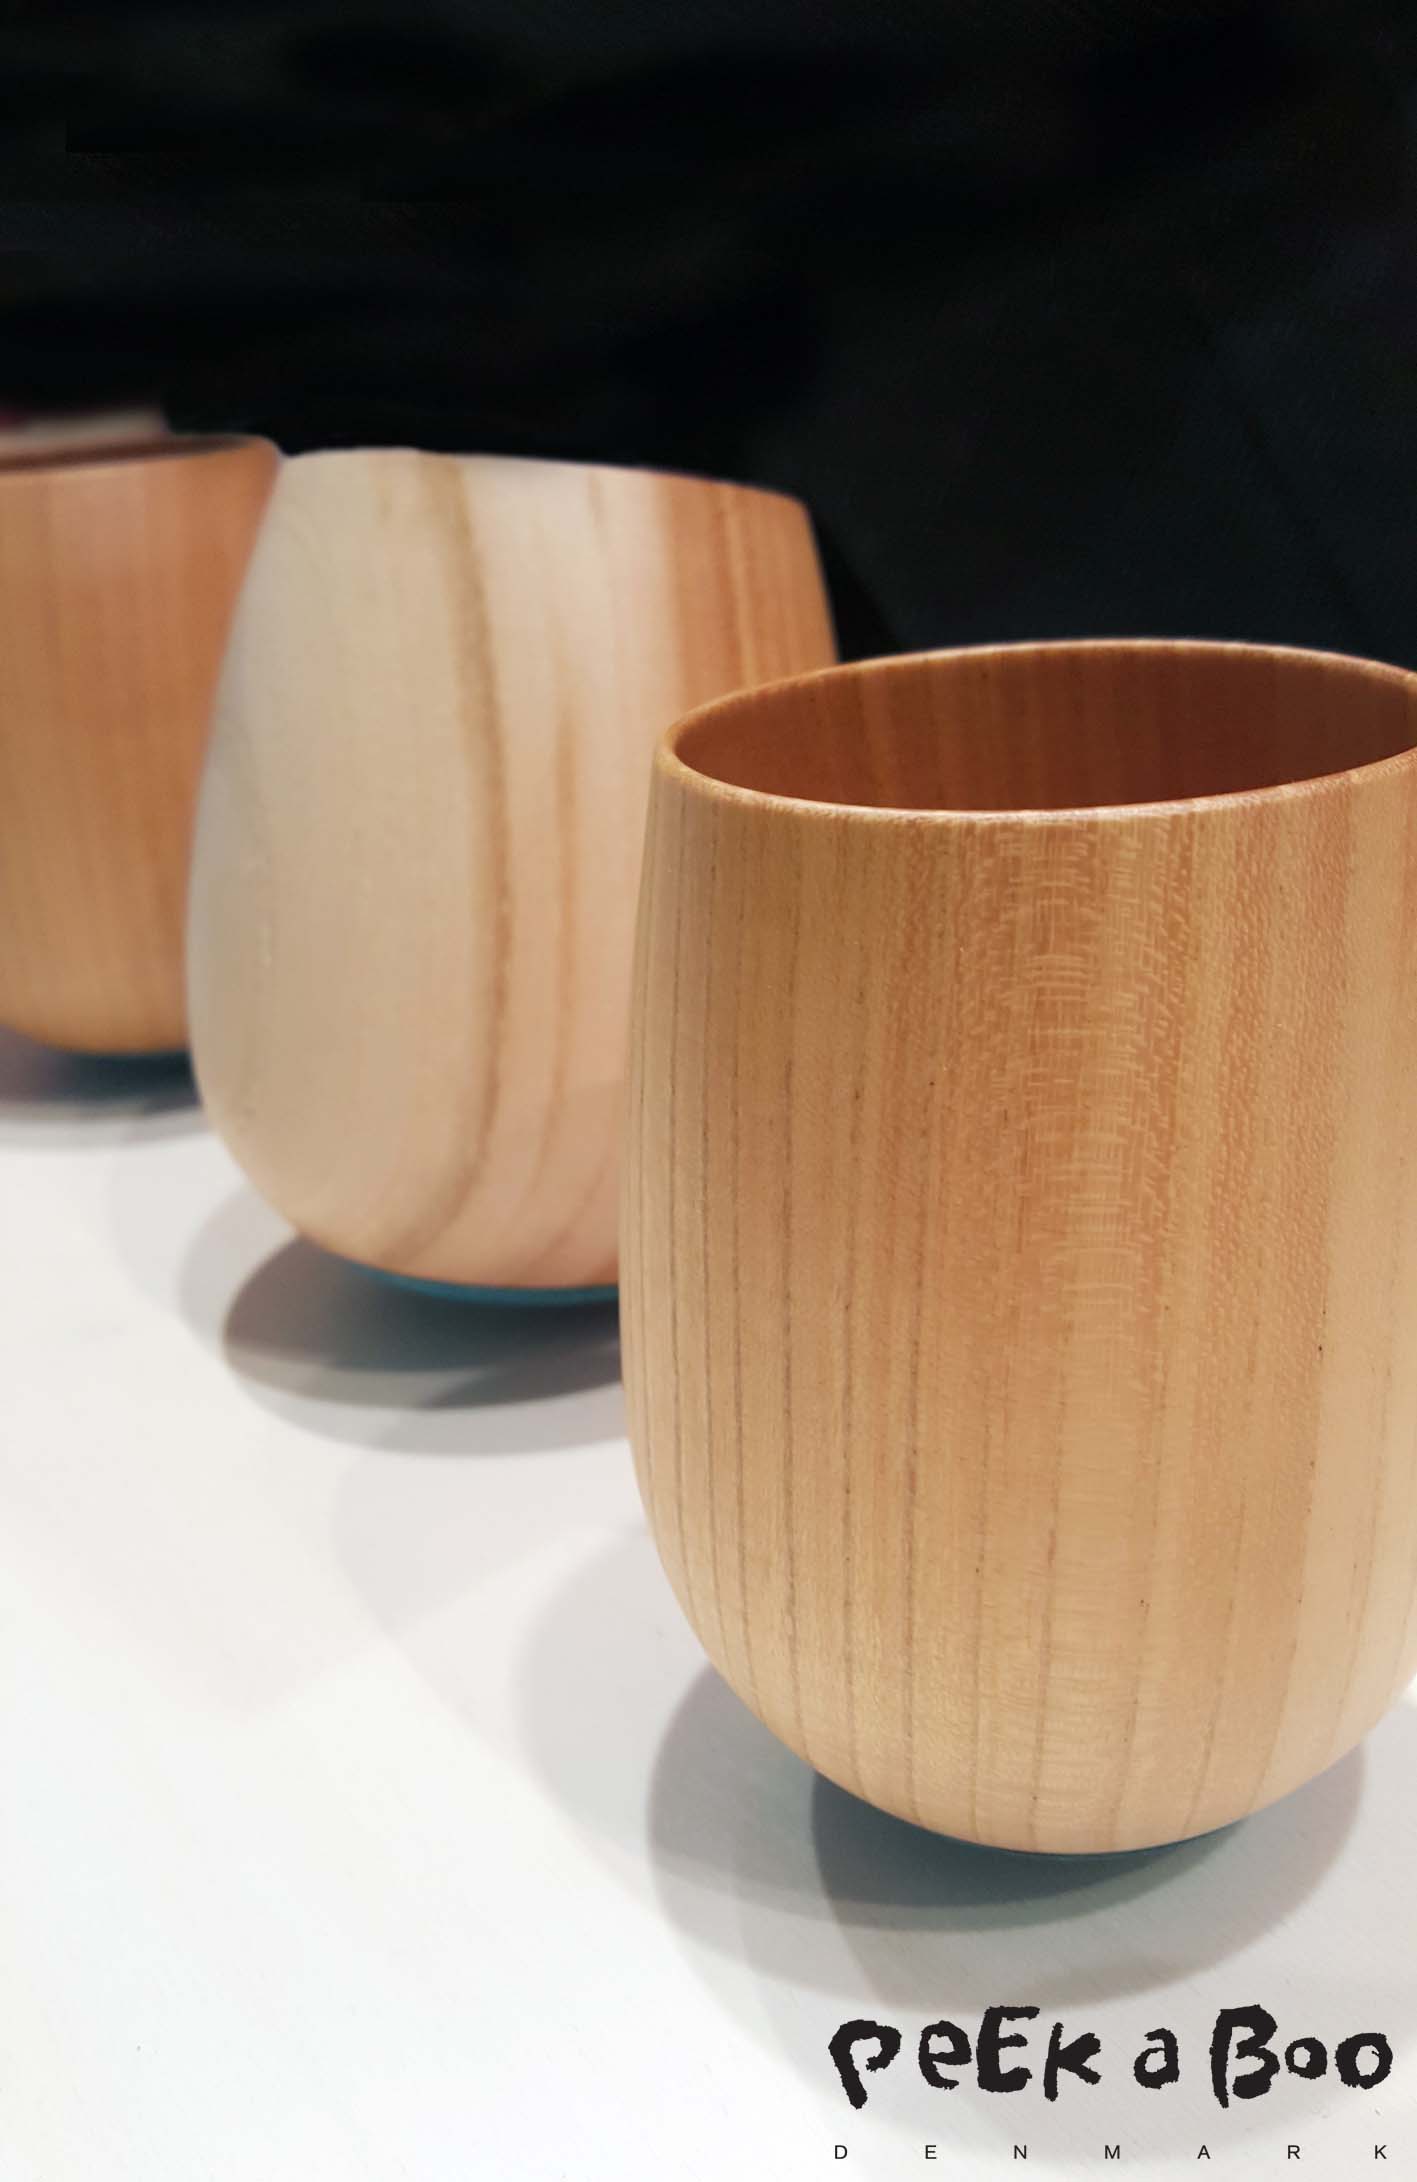 The brand Kisen make teapots, but have now started doing wooden cups. The fine craftmanship and the beautiful wood makes these cups very unique.